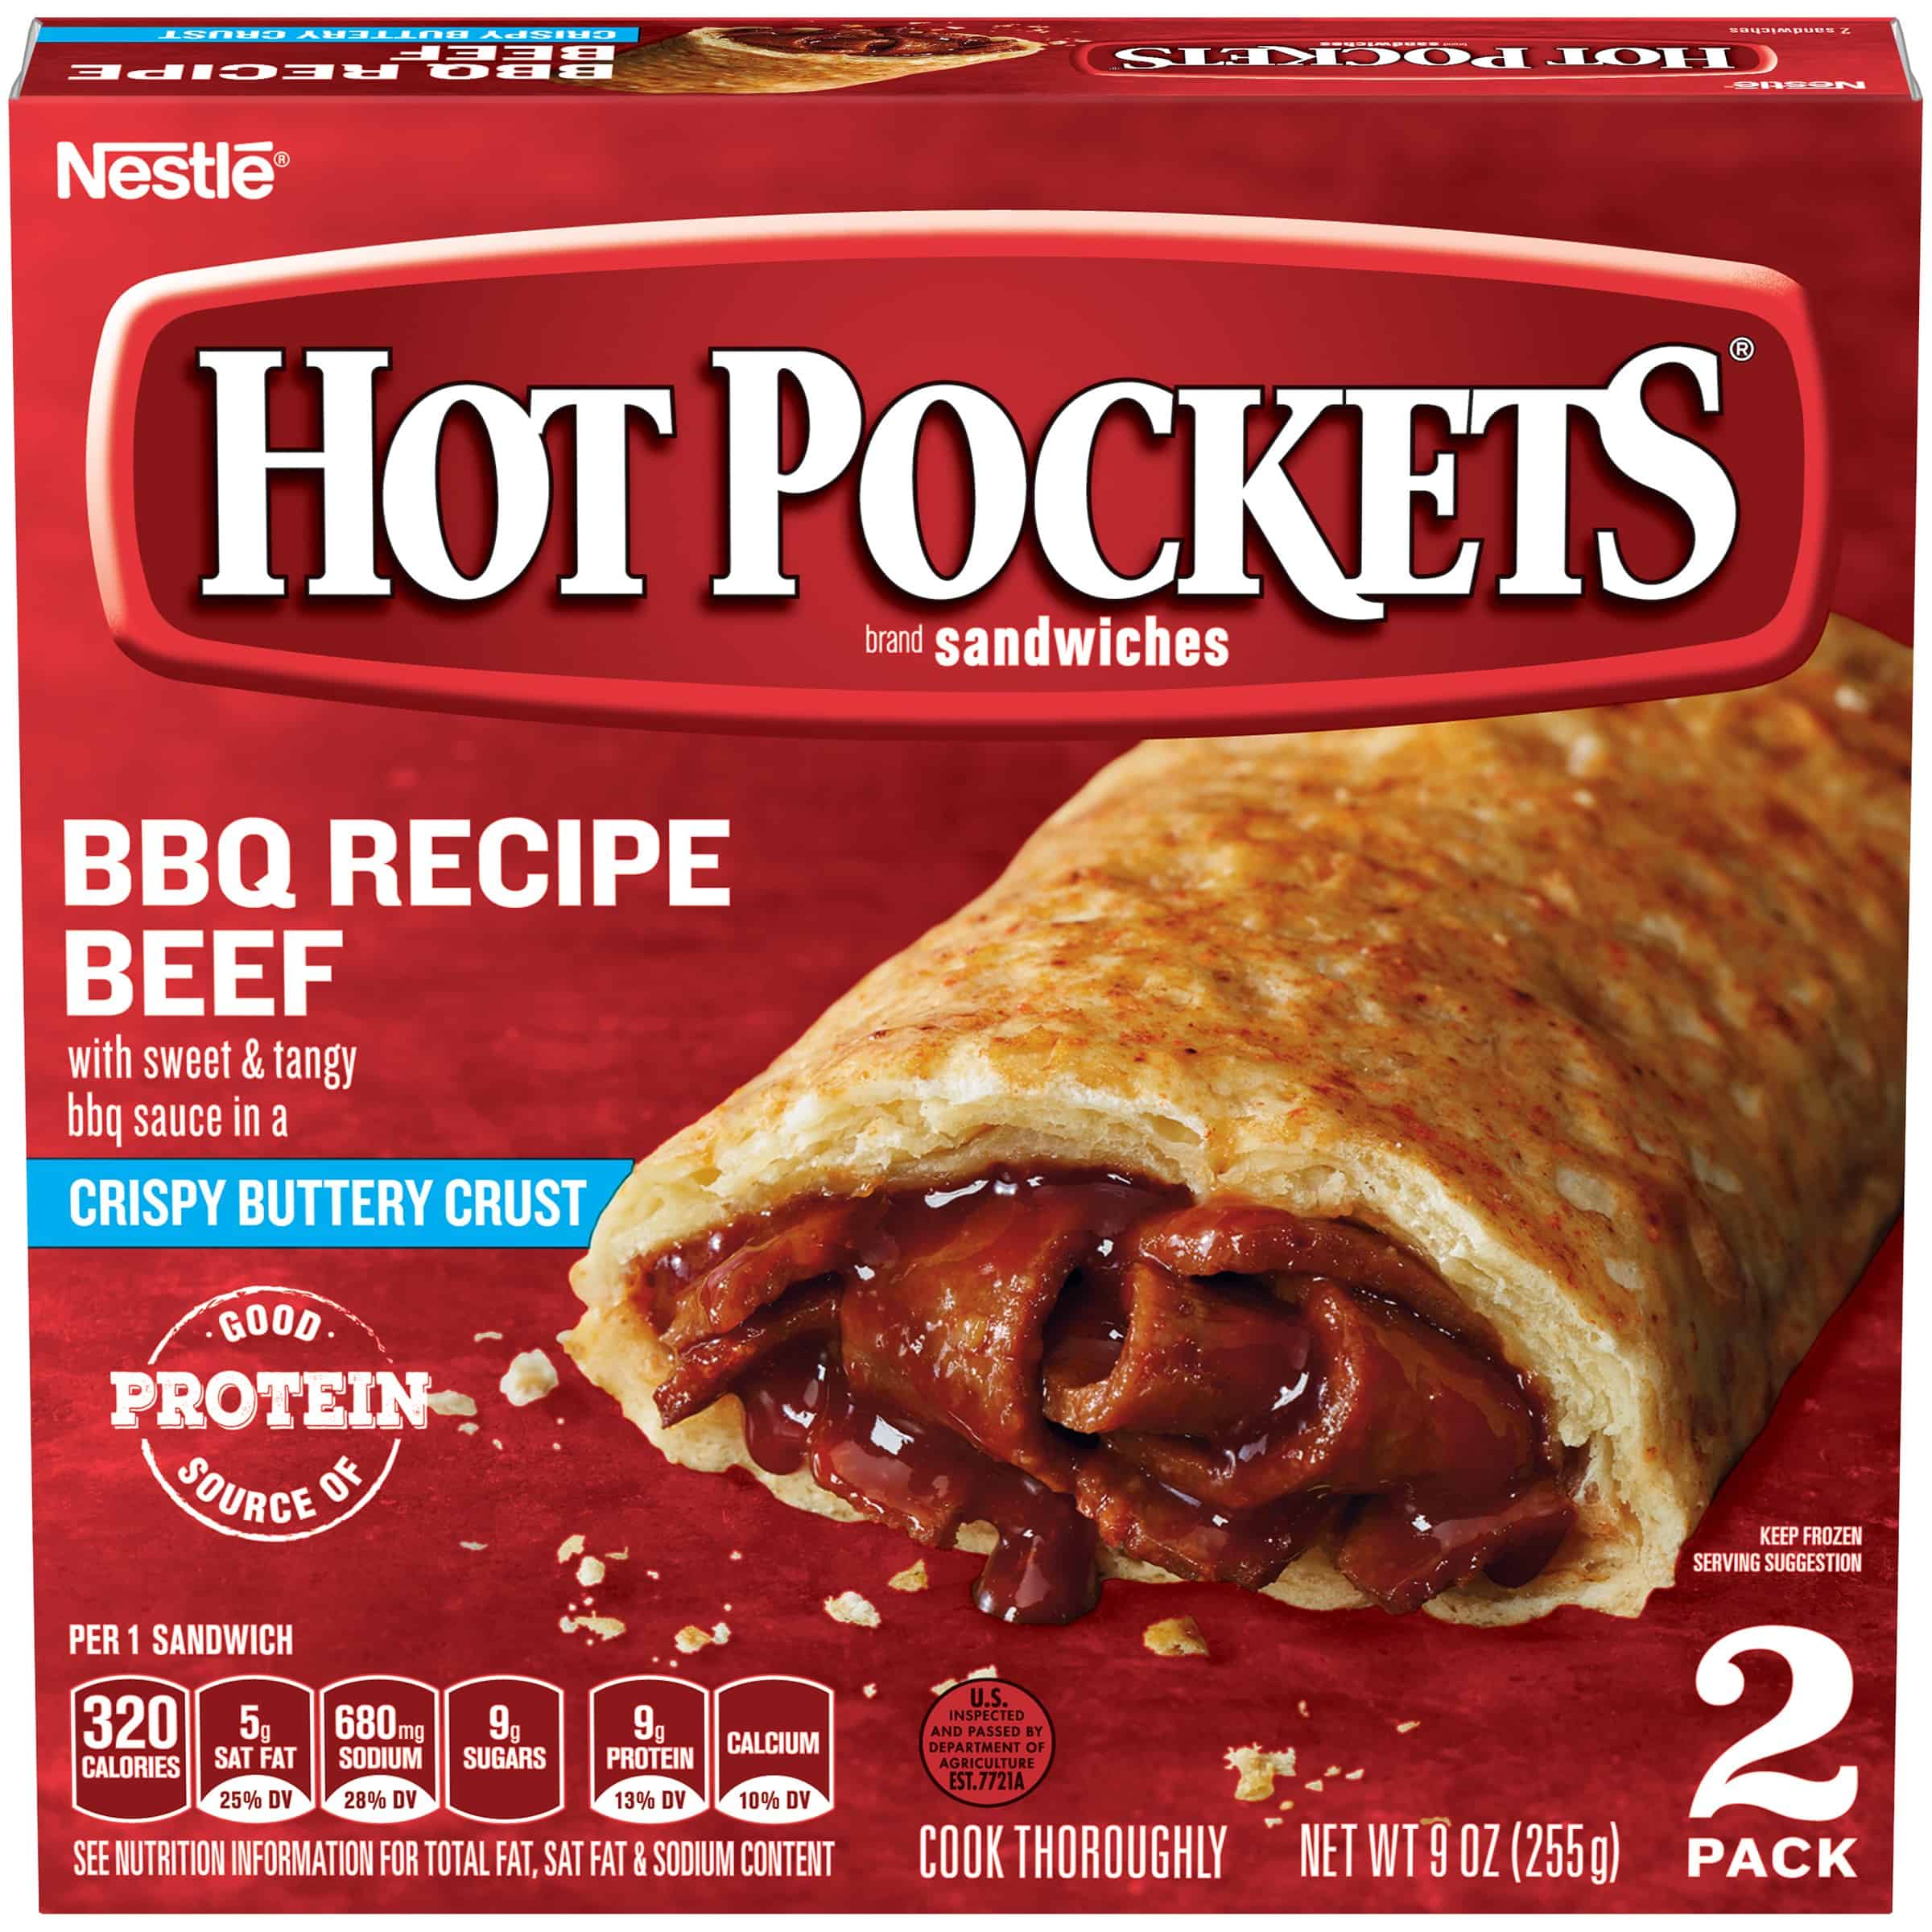 Hot pockets BBQ beef recipe 2 pack